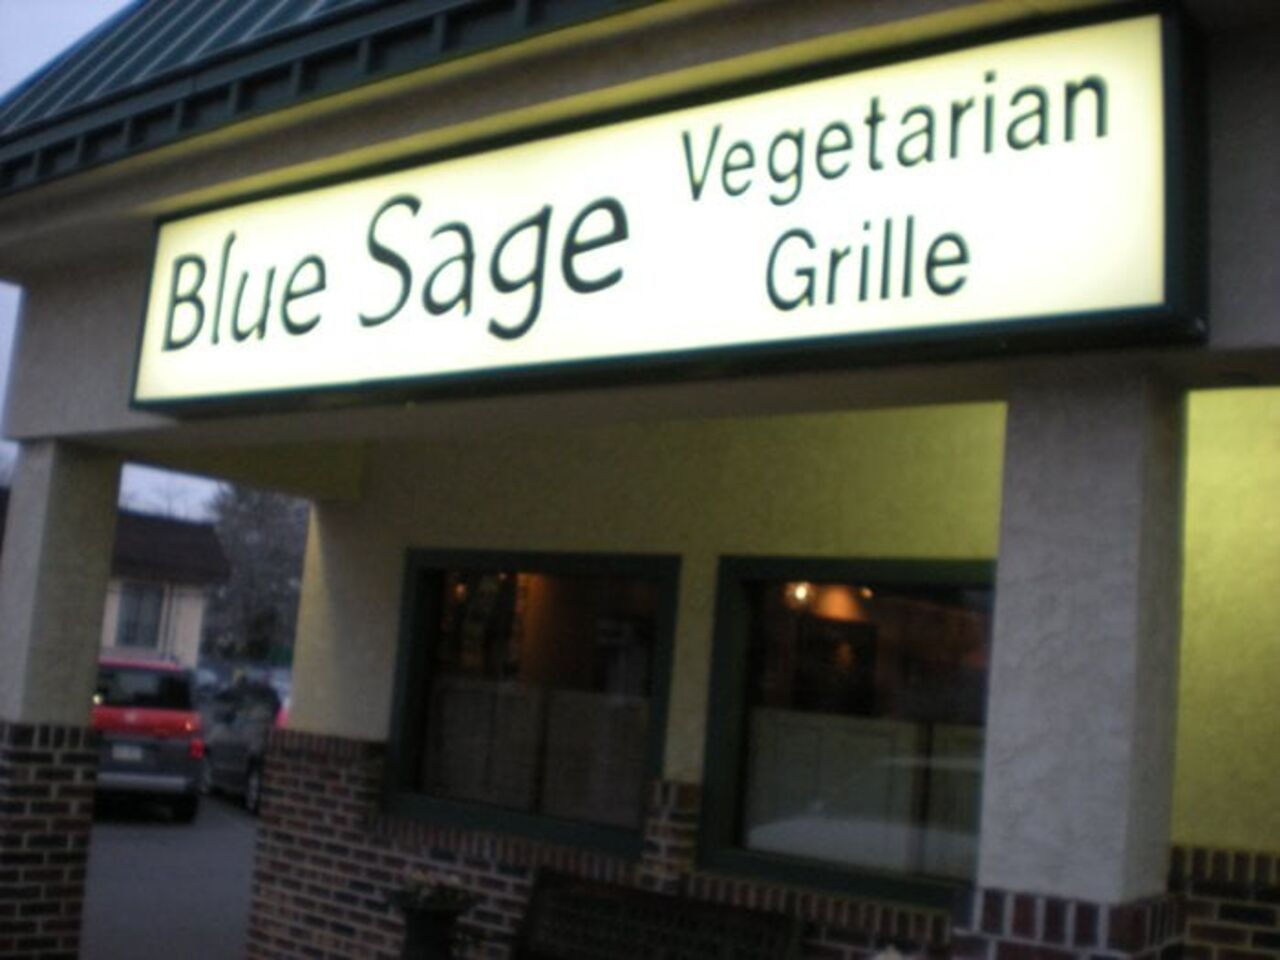 A photo of Blue Sage Vegetarian Grille